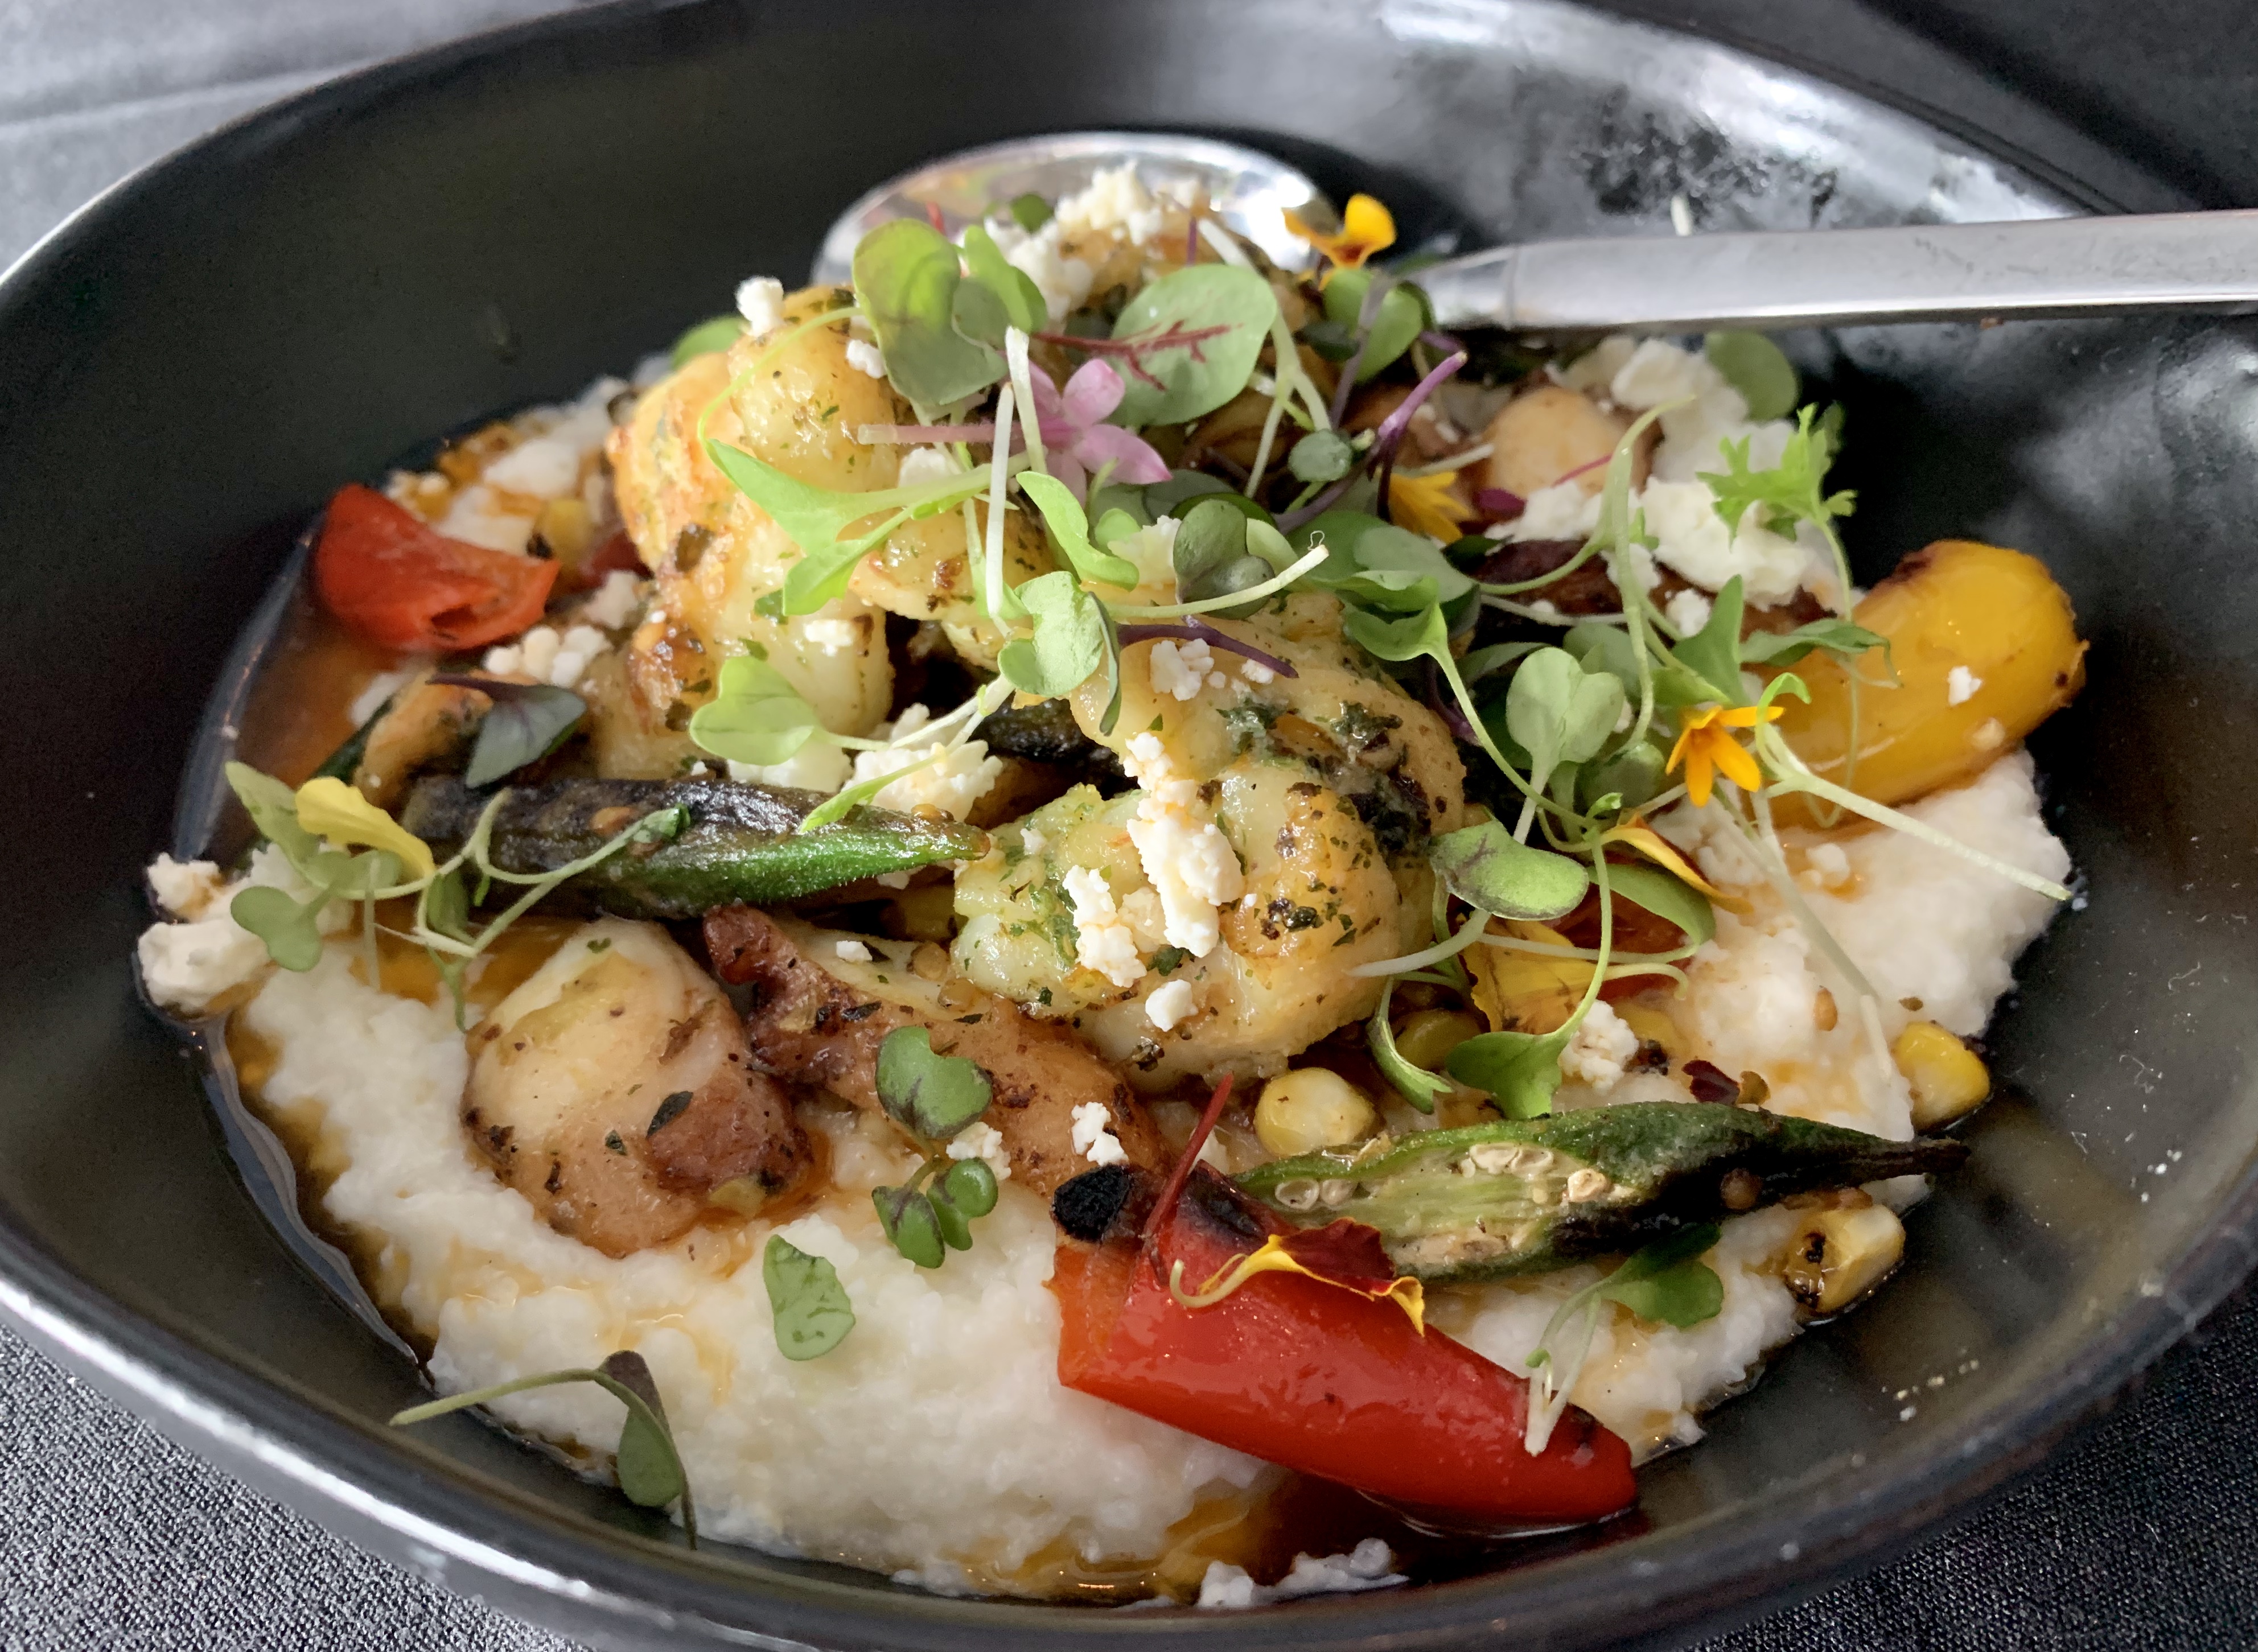 Shrimp and Octopus Grits with Charred Corn, Okra, Roasted Peppers, Tomatoes, Feta and Lobster Butter. Offered on the Brunch menu.